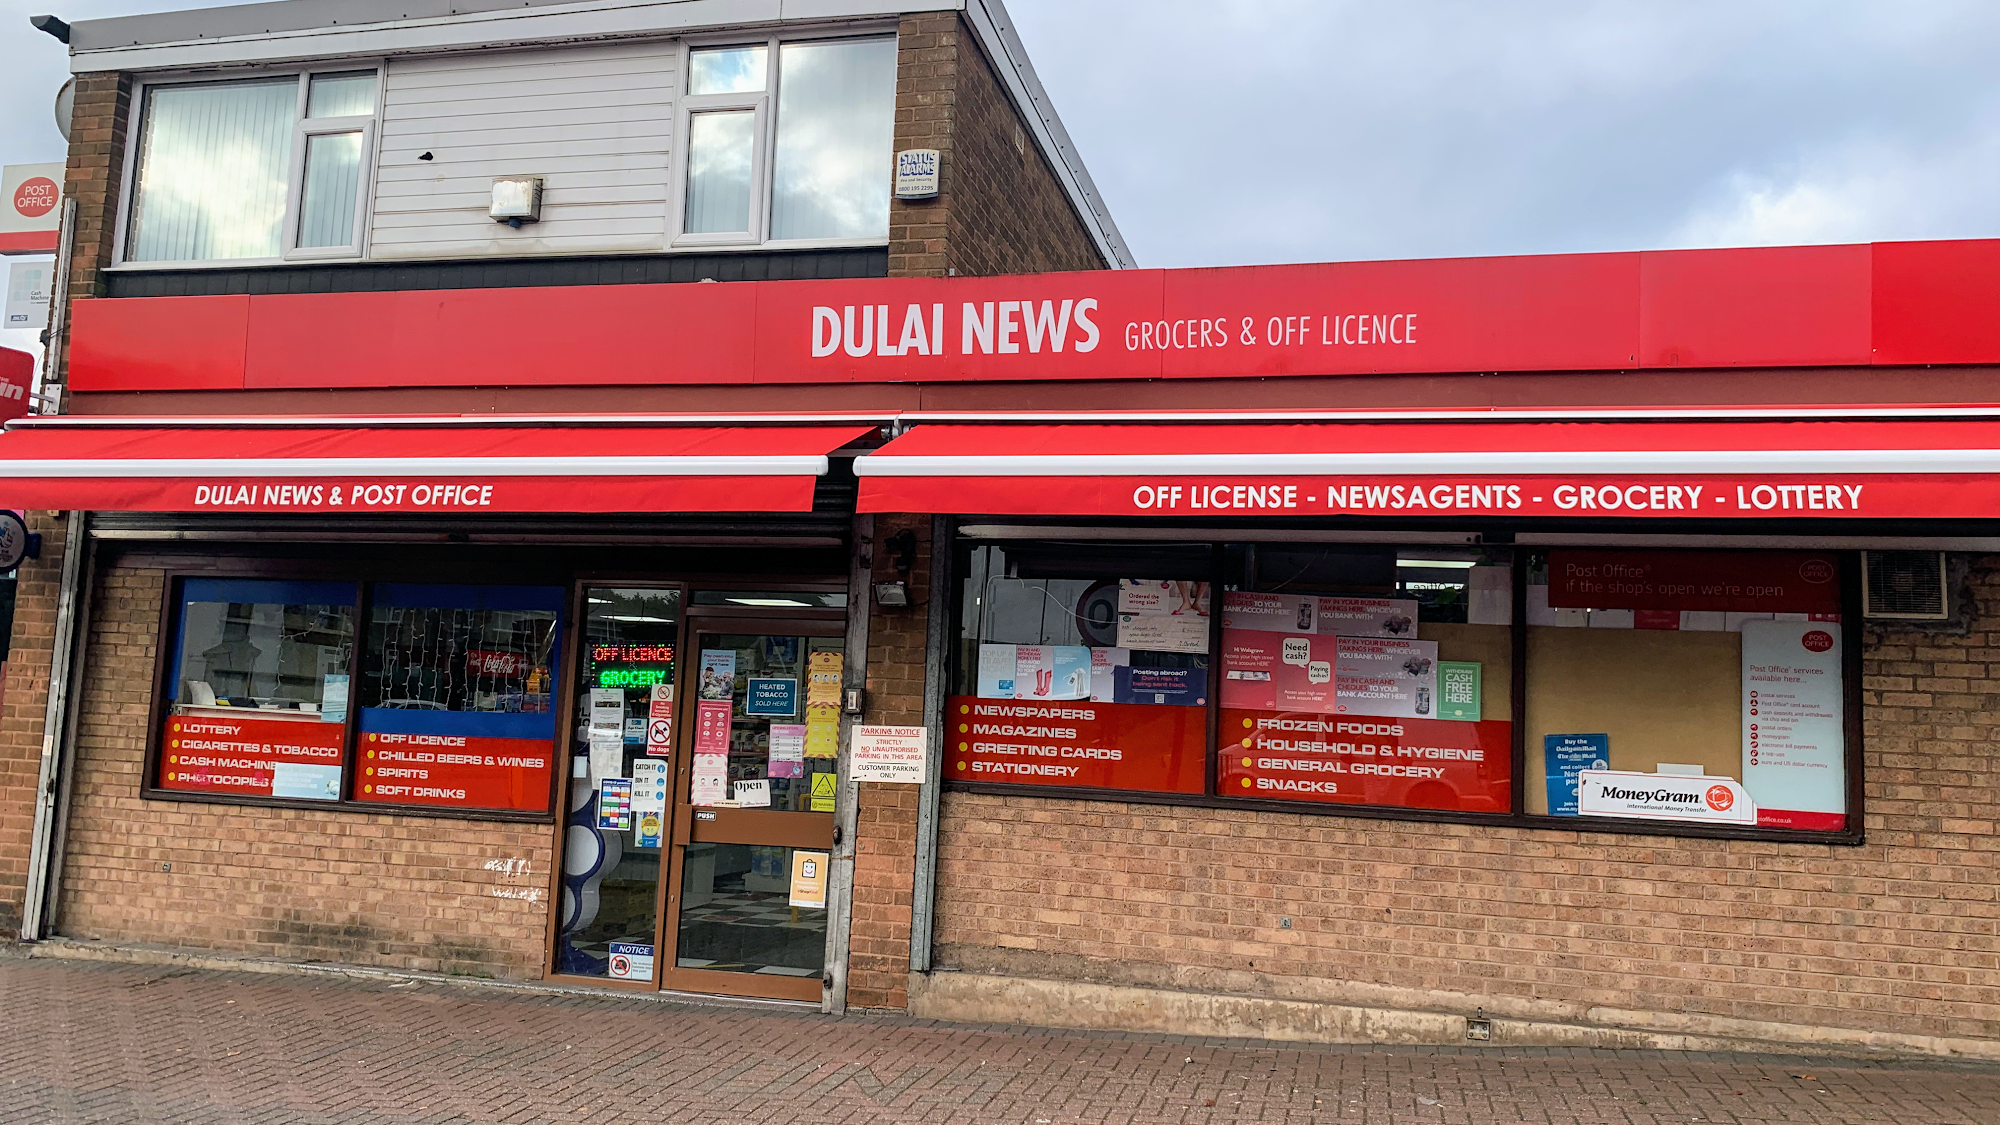 Walsgrave on Sowe P.O. And Dulai news POST OFFICE OPEN 0900 TO 16-30